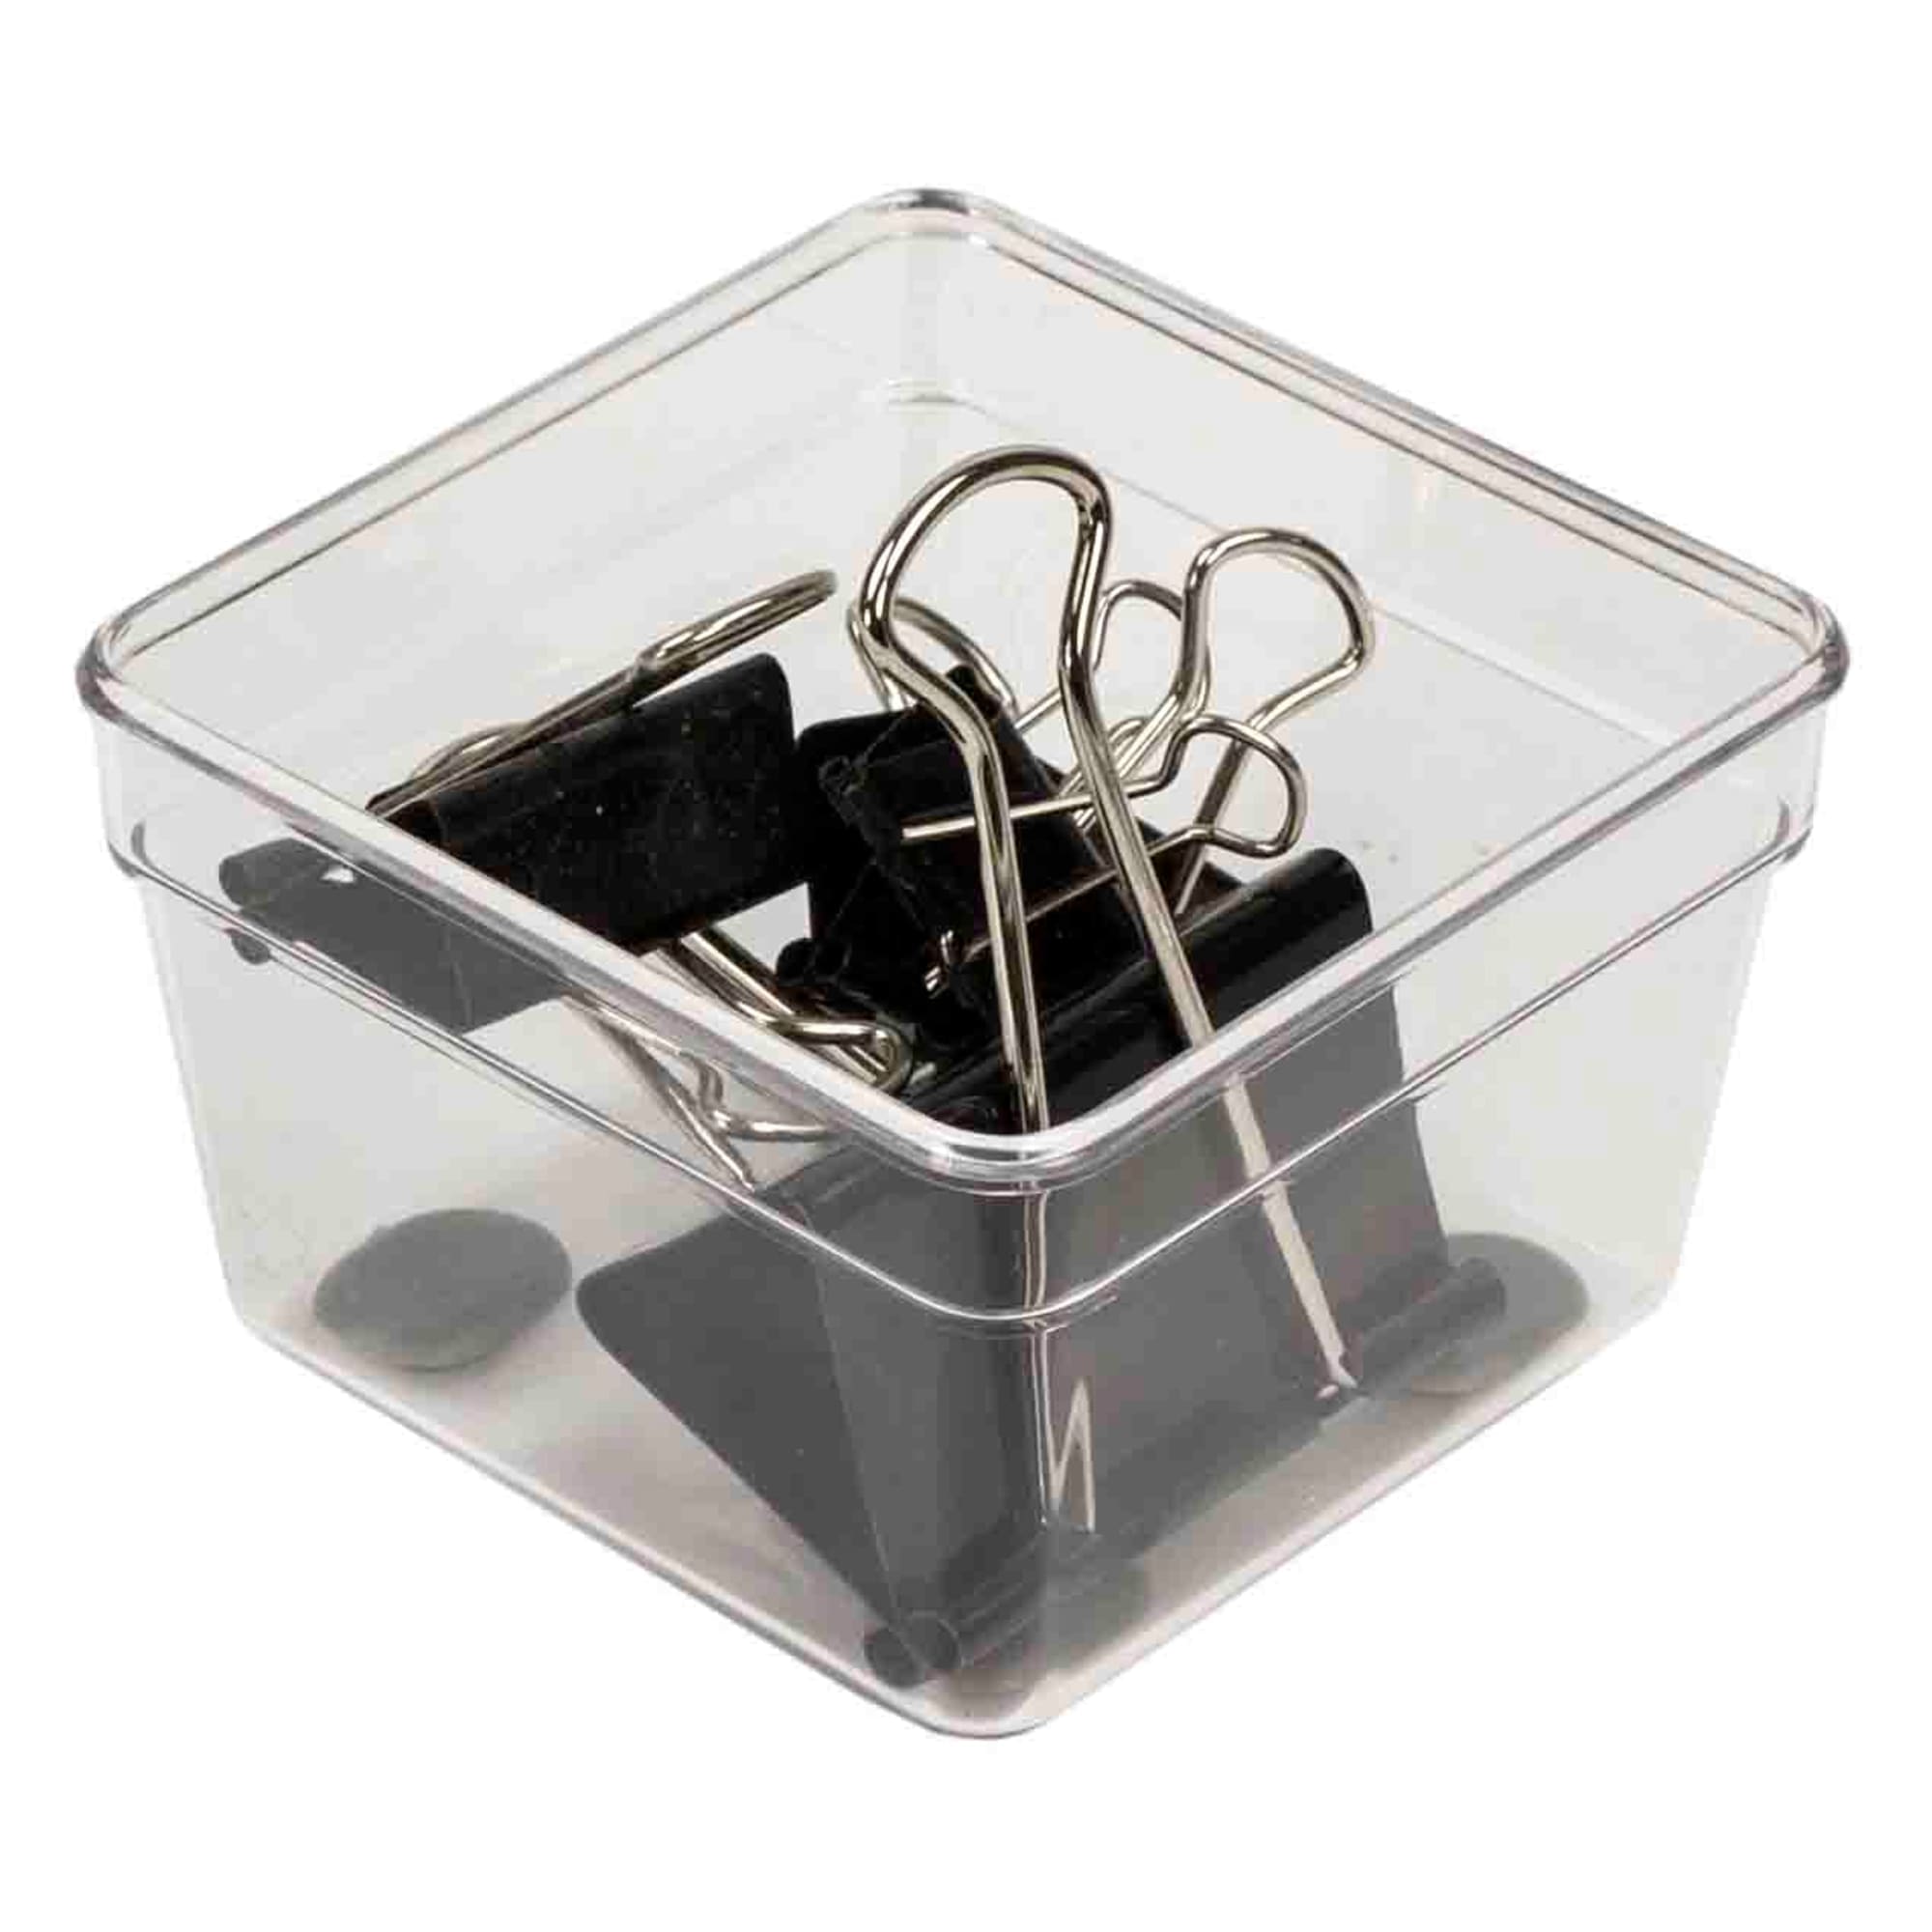 Home Basics Clear Drawer Organizer $1.5 EACH, CASE PACK OF 24